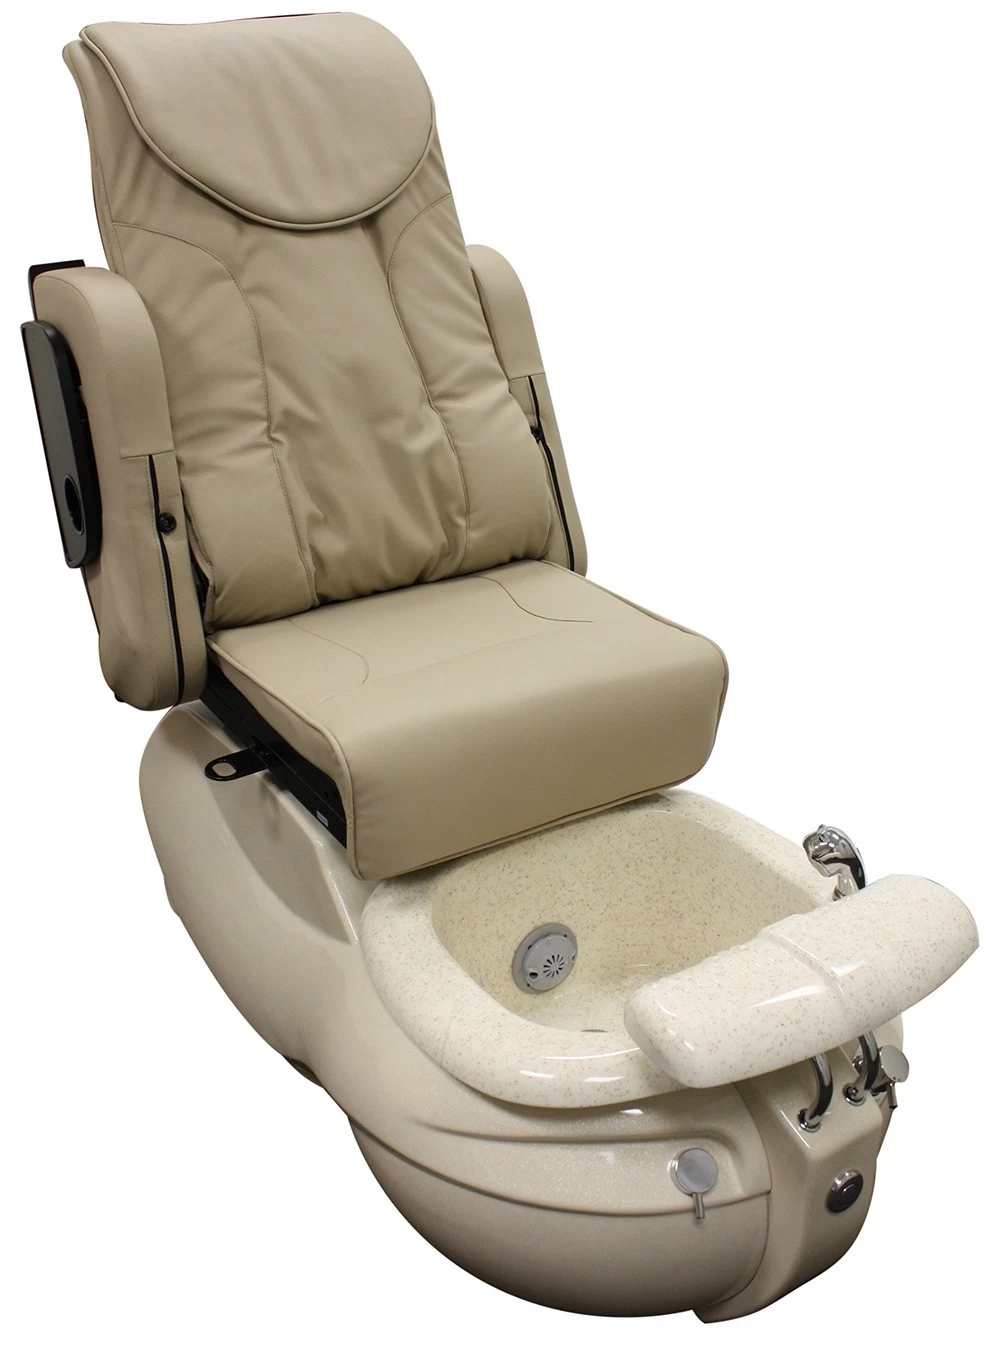 Pedicure chair with pipeless jet spa massage chair manufacturer of pedicure chair china